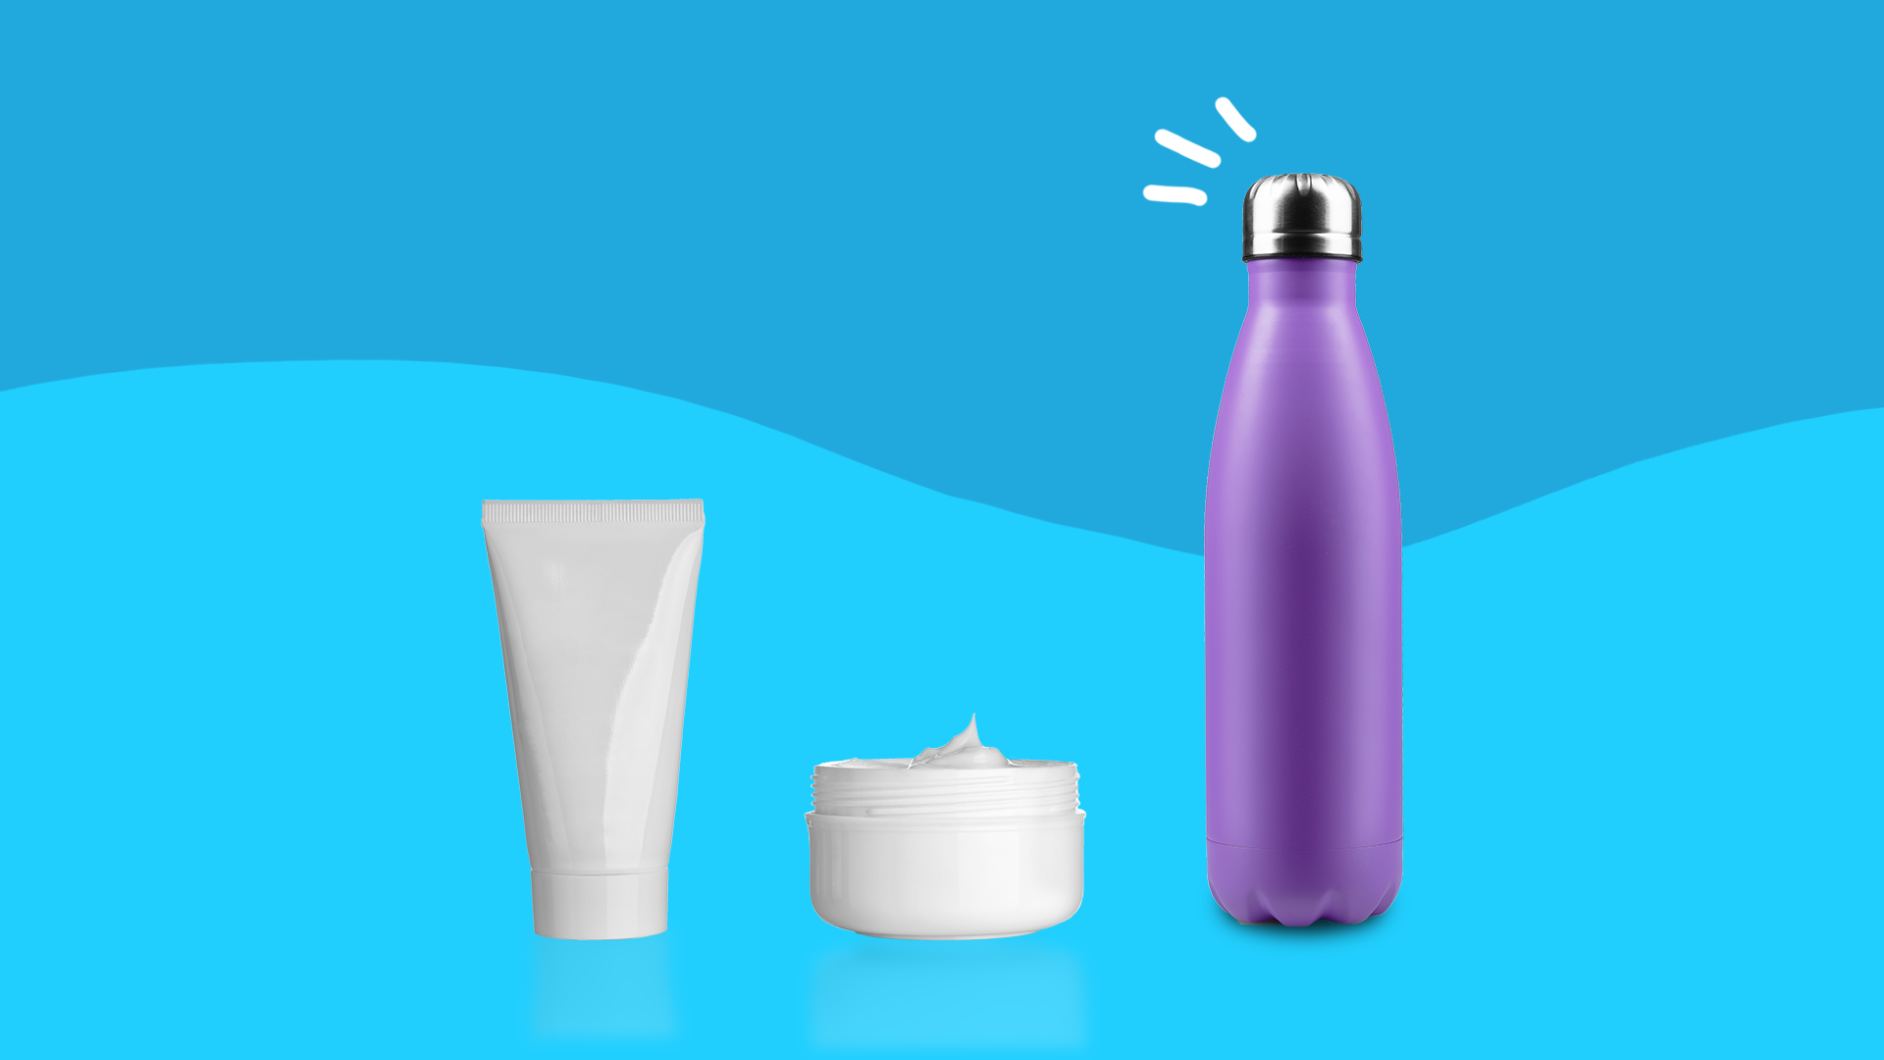 Lotion and a water bottle represent medications that cause dry skin